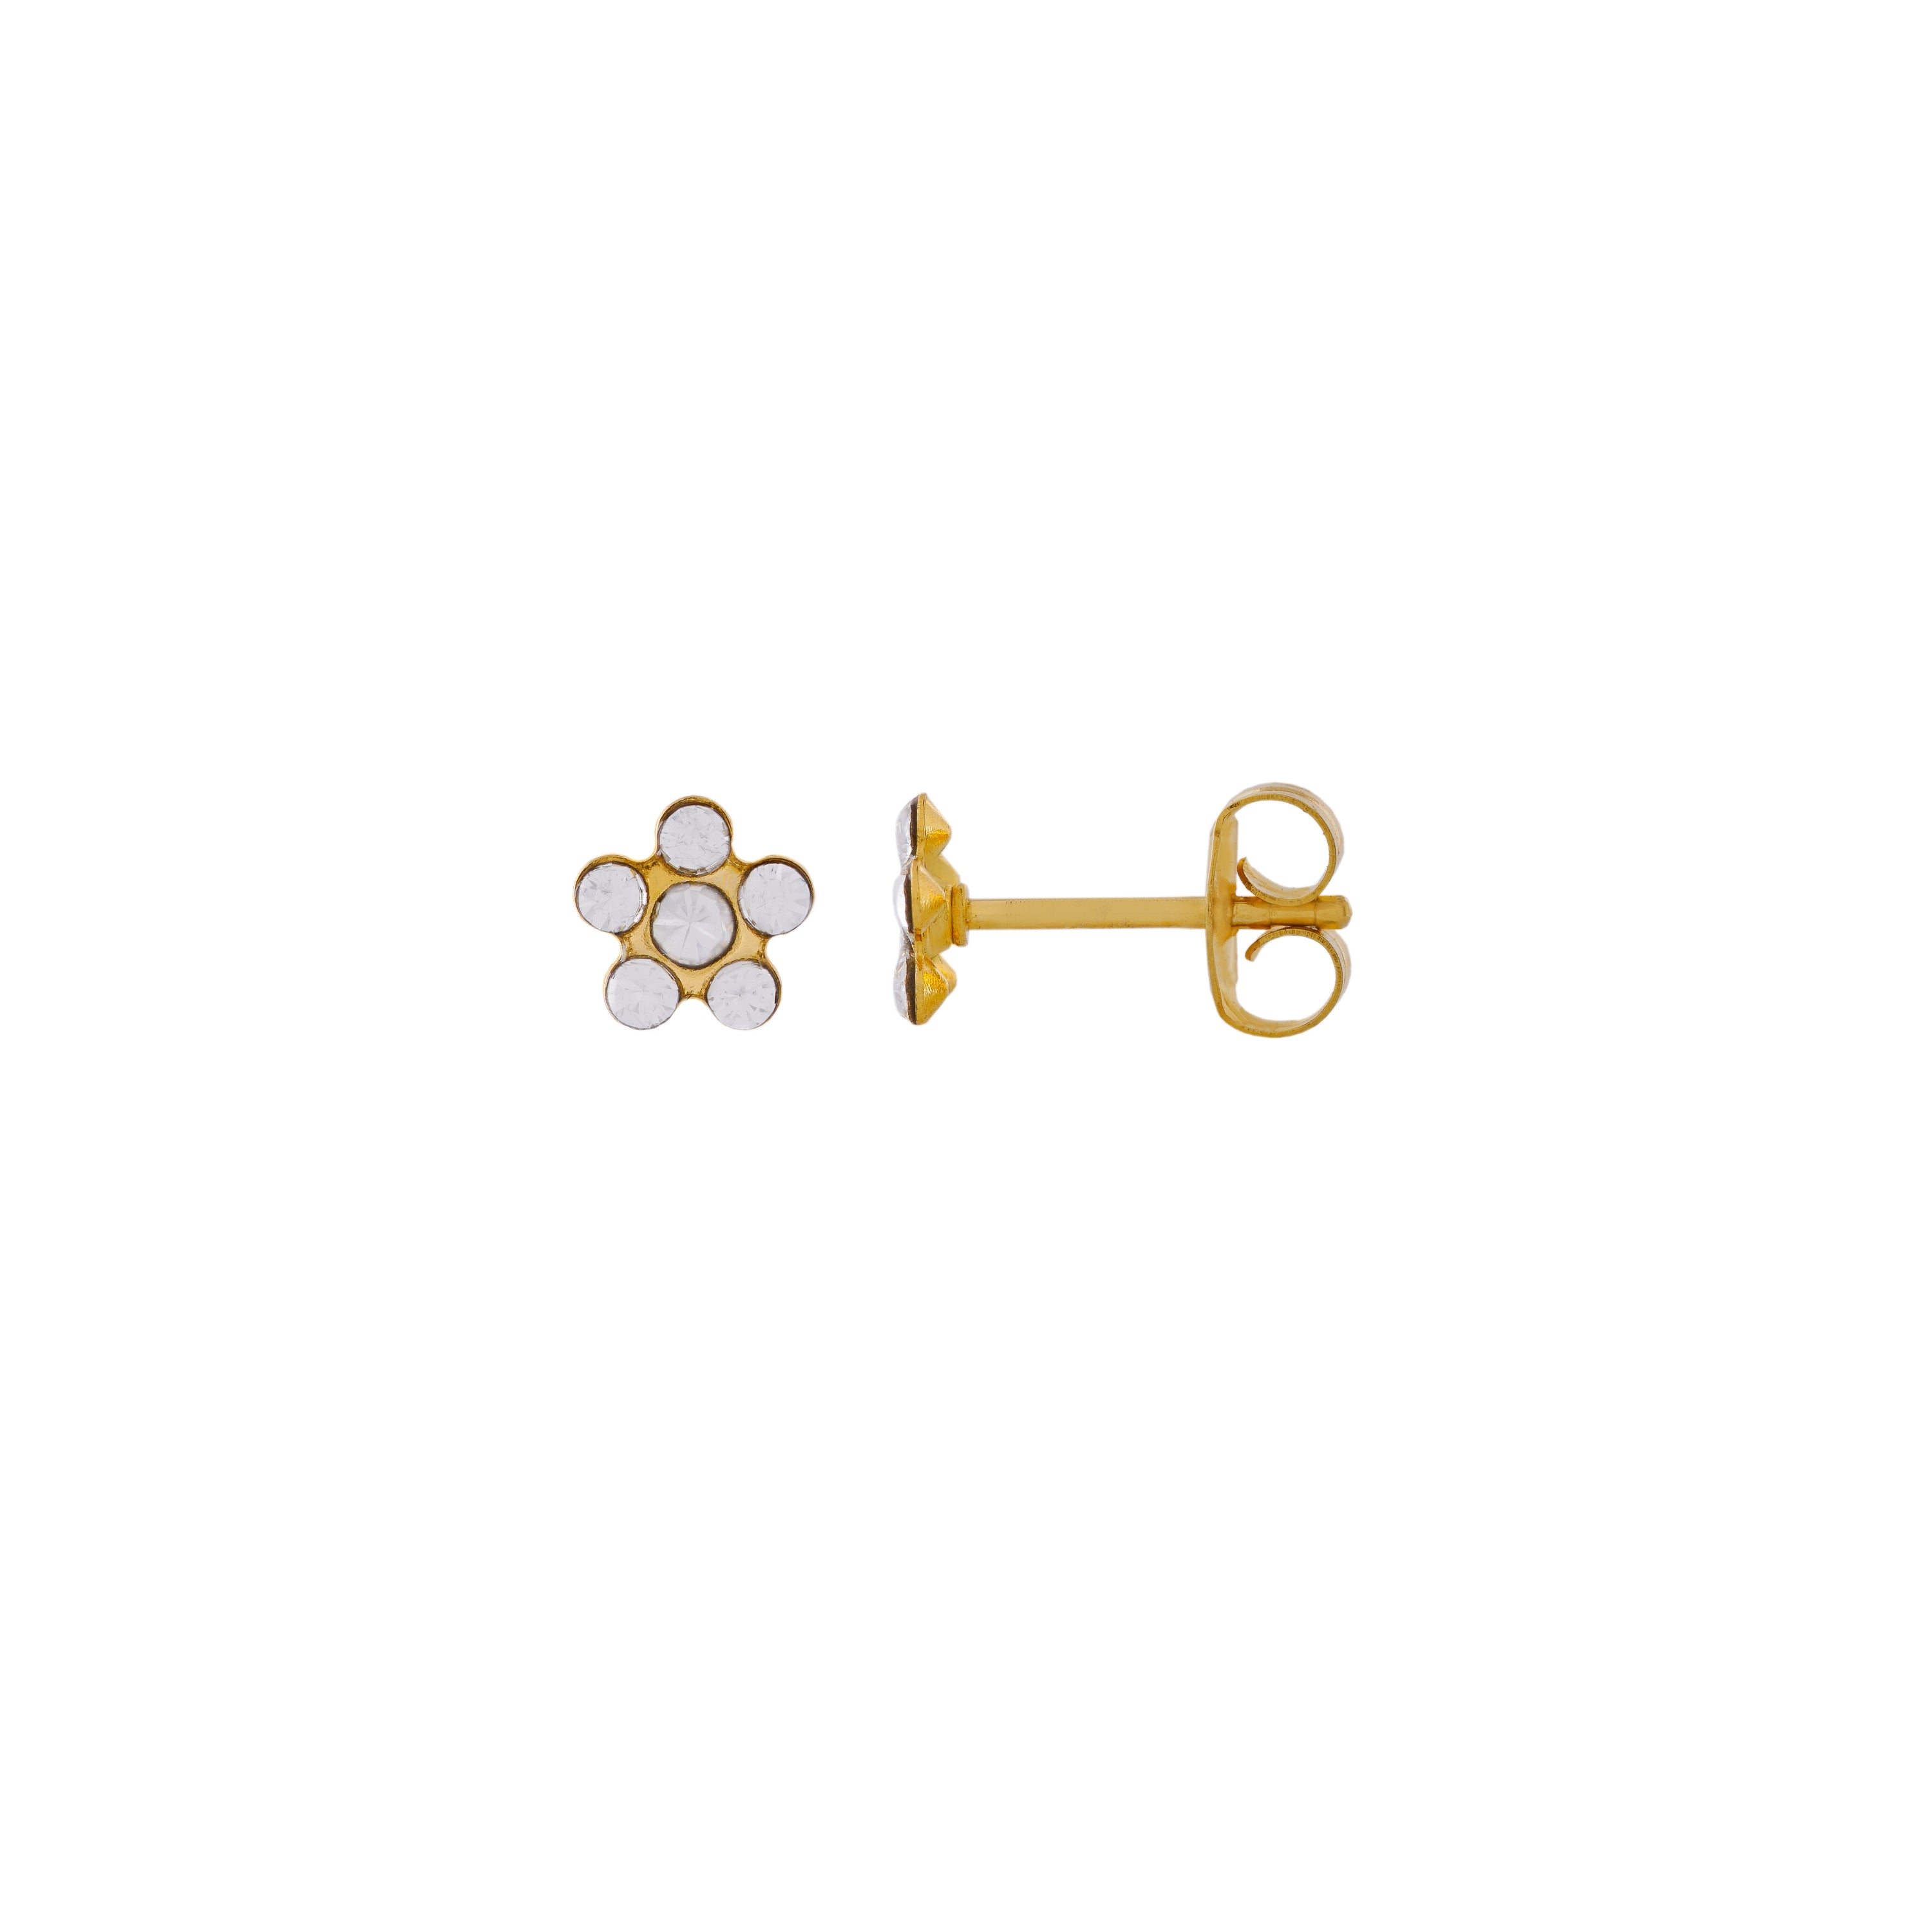 Daisy April Crystal 24K Pure Gold Plated Ear Studs | MADE IN USA | Ideal for everyday wear